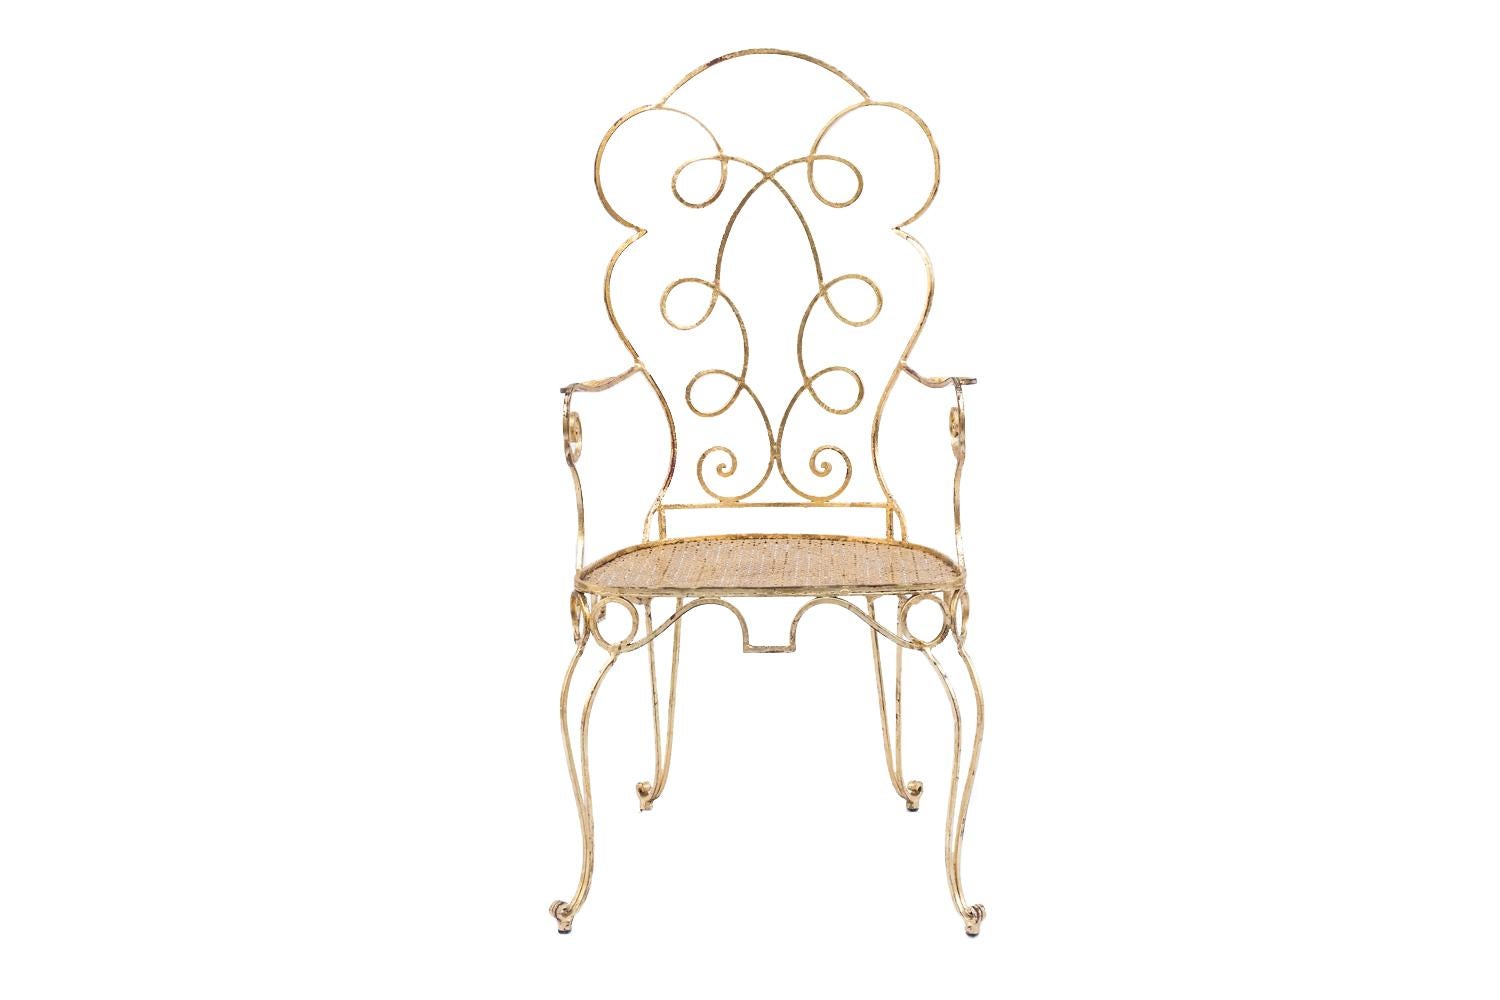 Pair of gilt wrought iron armchairs with curved shapes standing on four slightly curved legs finishing in scrolls. Tormented back with a motif of tracery. Scrolled armrests supports slightly beneath the leg line. Seat with an openwork decor